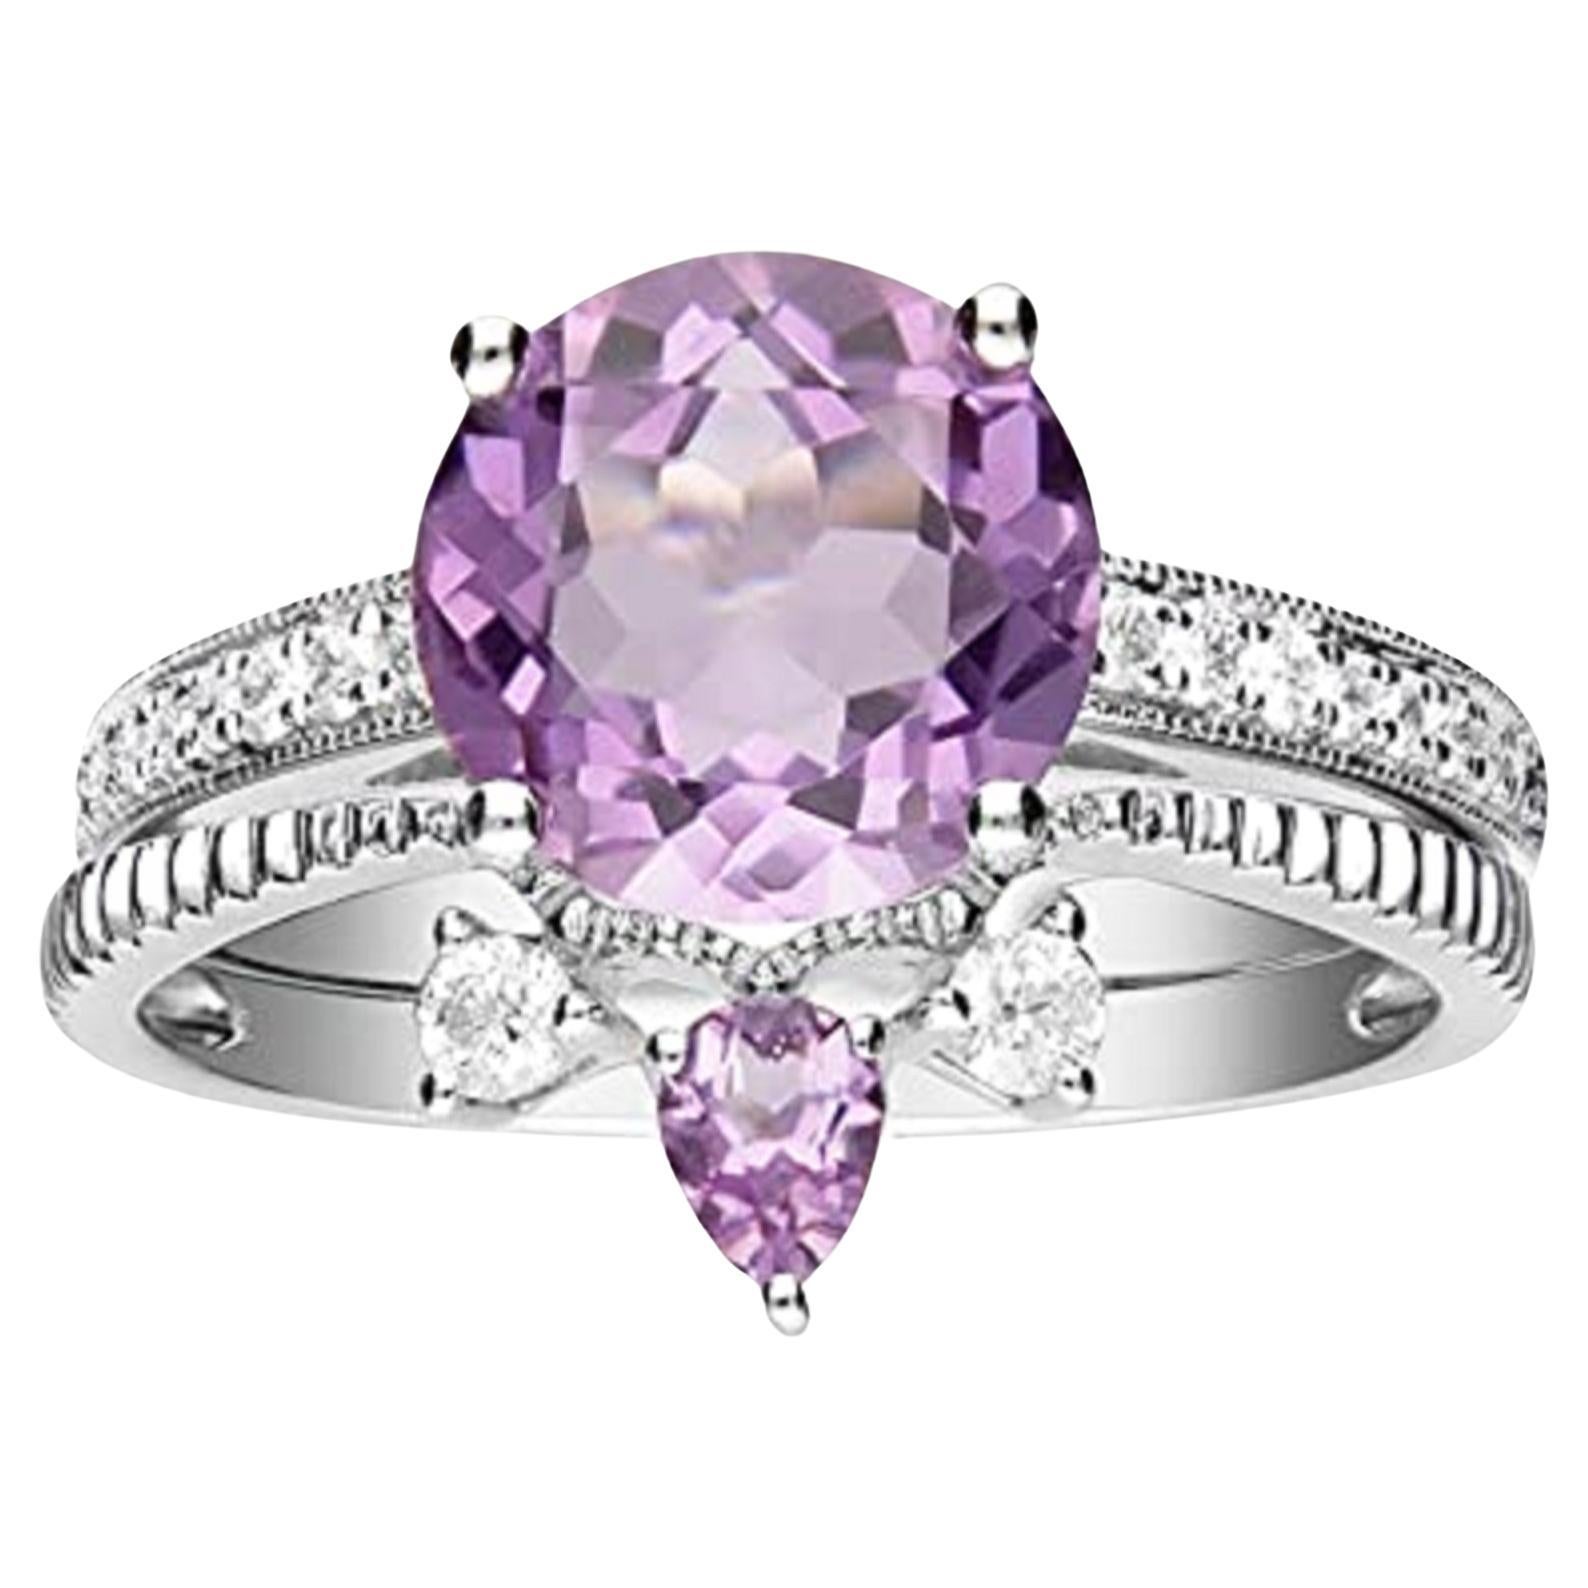 Gin & Grace 14K White Gold Diamond Ring (I1) with Pink Amethyst For Women